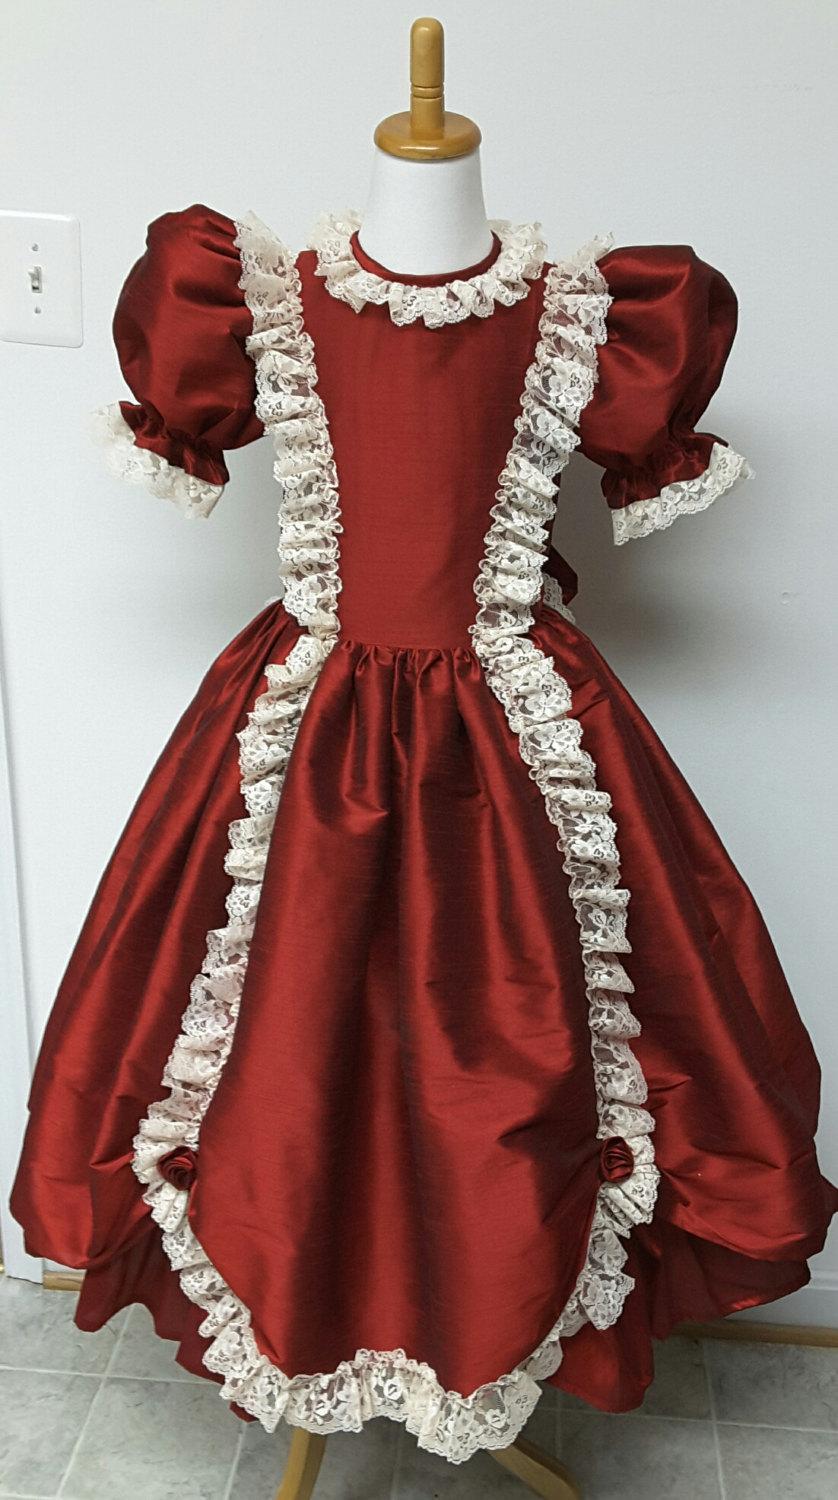 Mariage - Princess Dress with Ruffles. Lace. Puffy Sleeves. Girls Victorian Style Dress. Weddings, Birthday. Ballet. Optional Pantaloons available